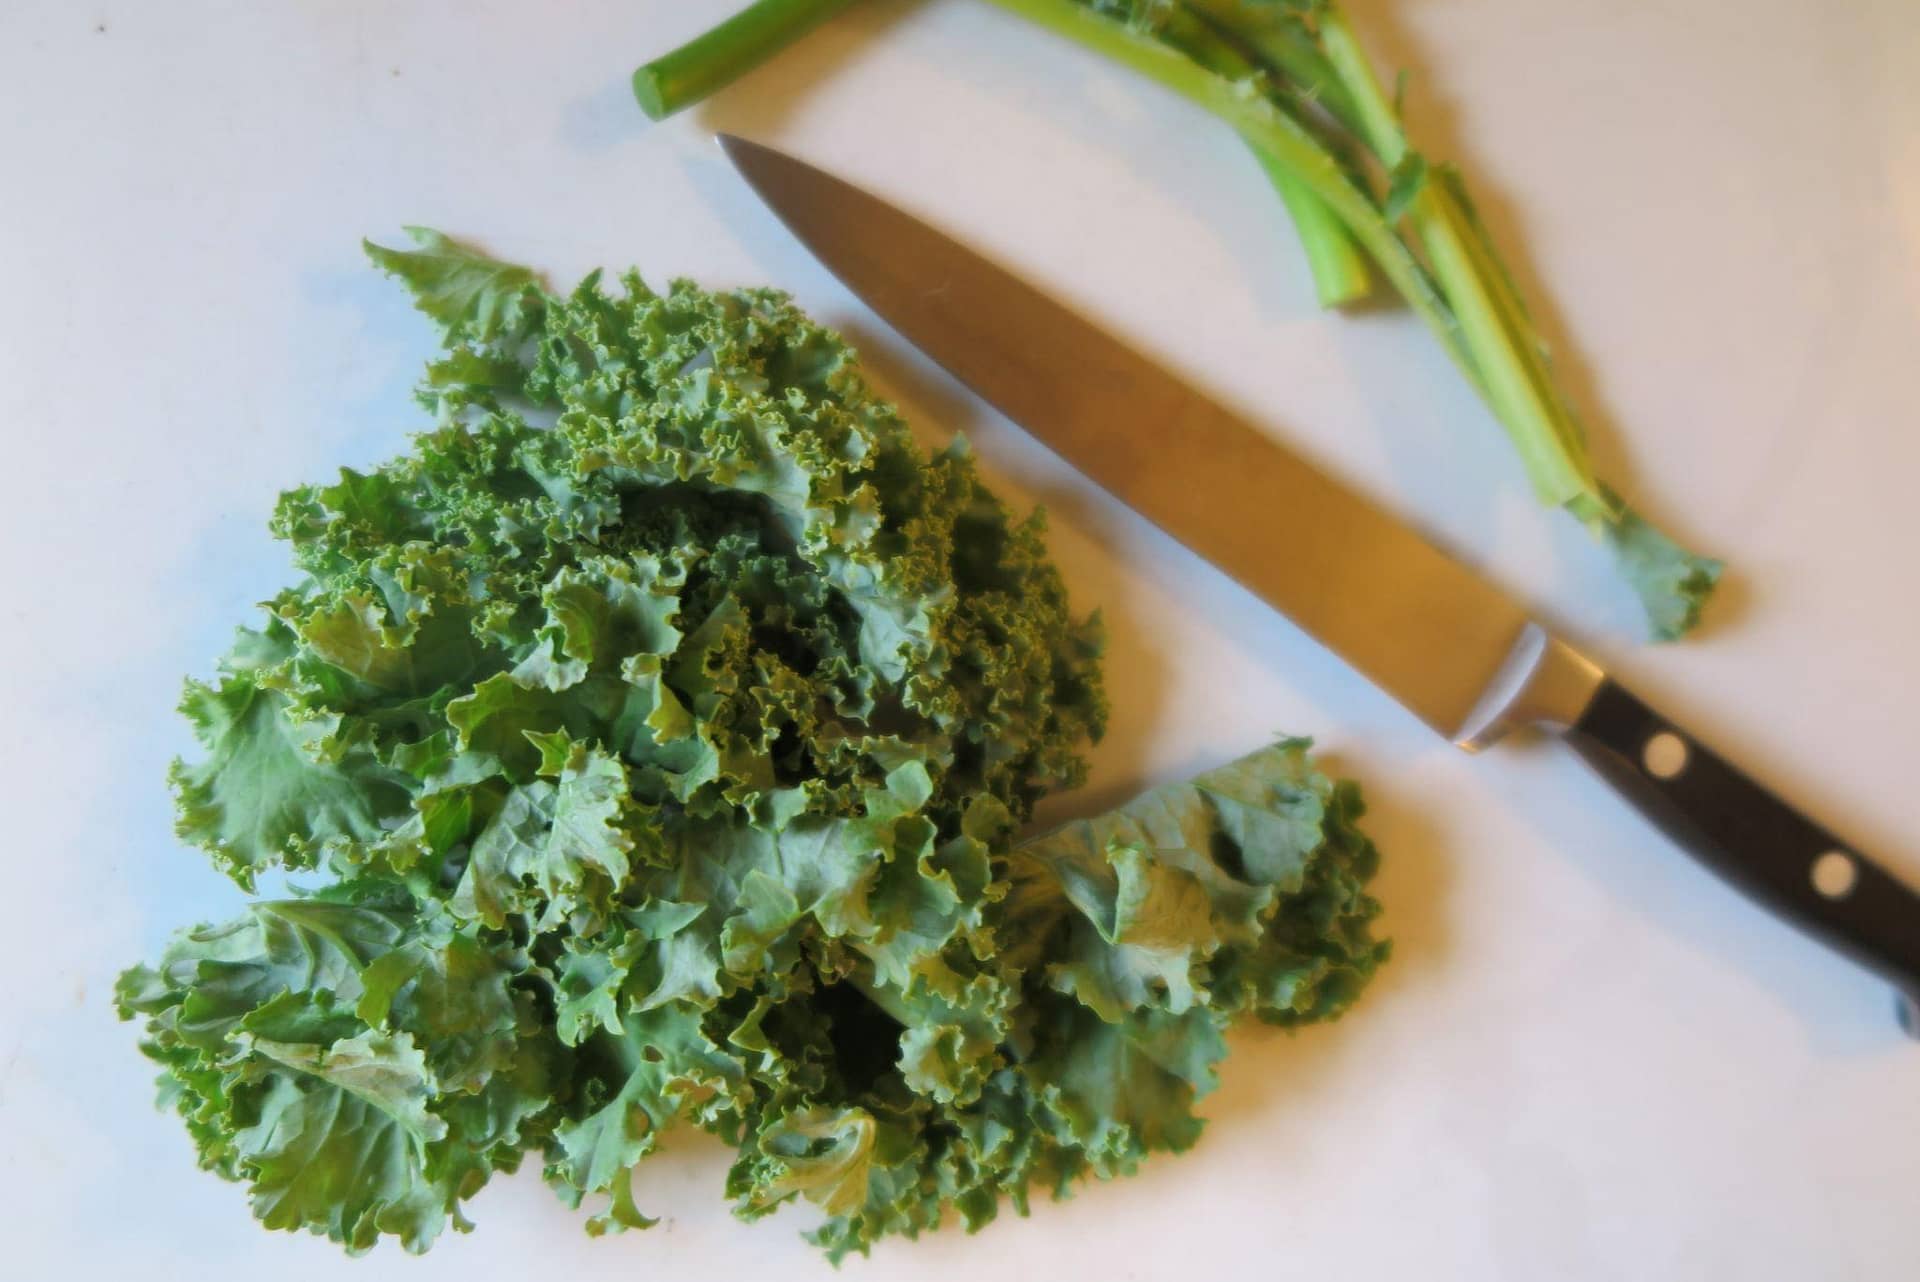 Chopped kale on a white background next to a kitchen knife and garlic scapes